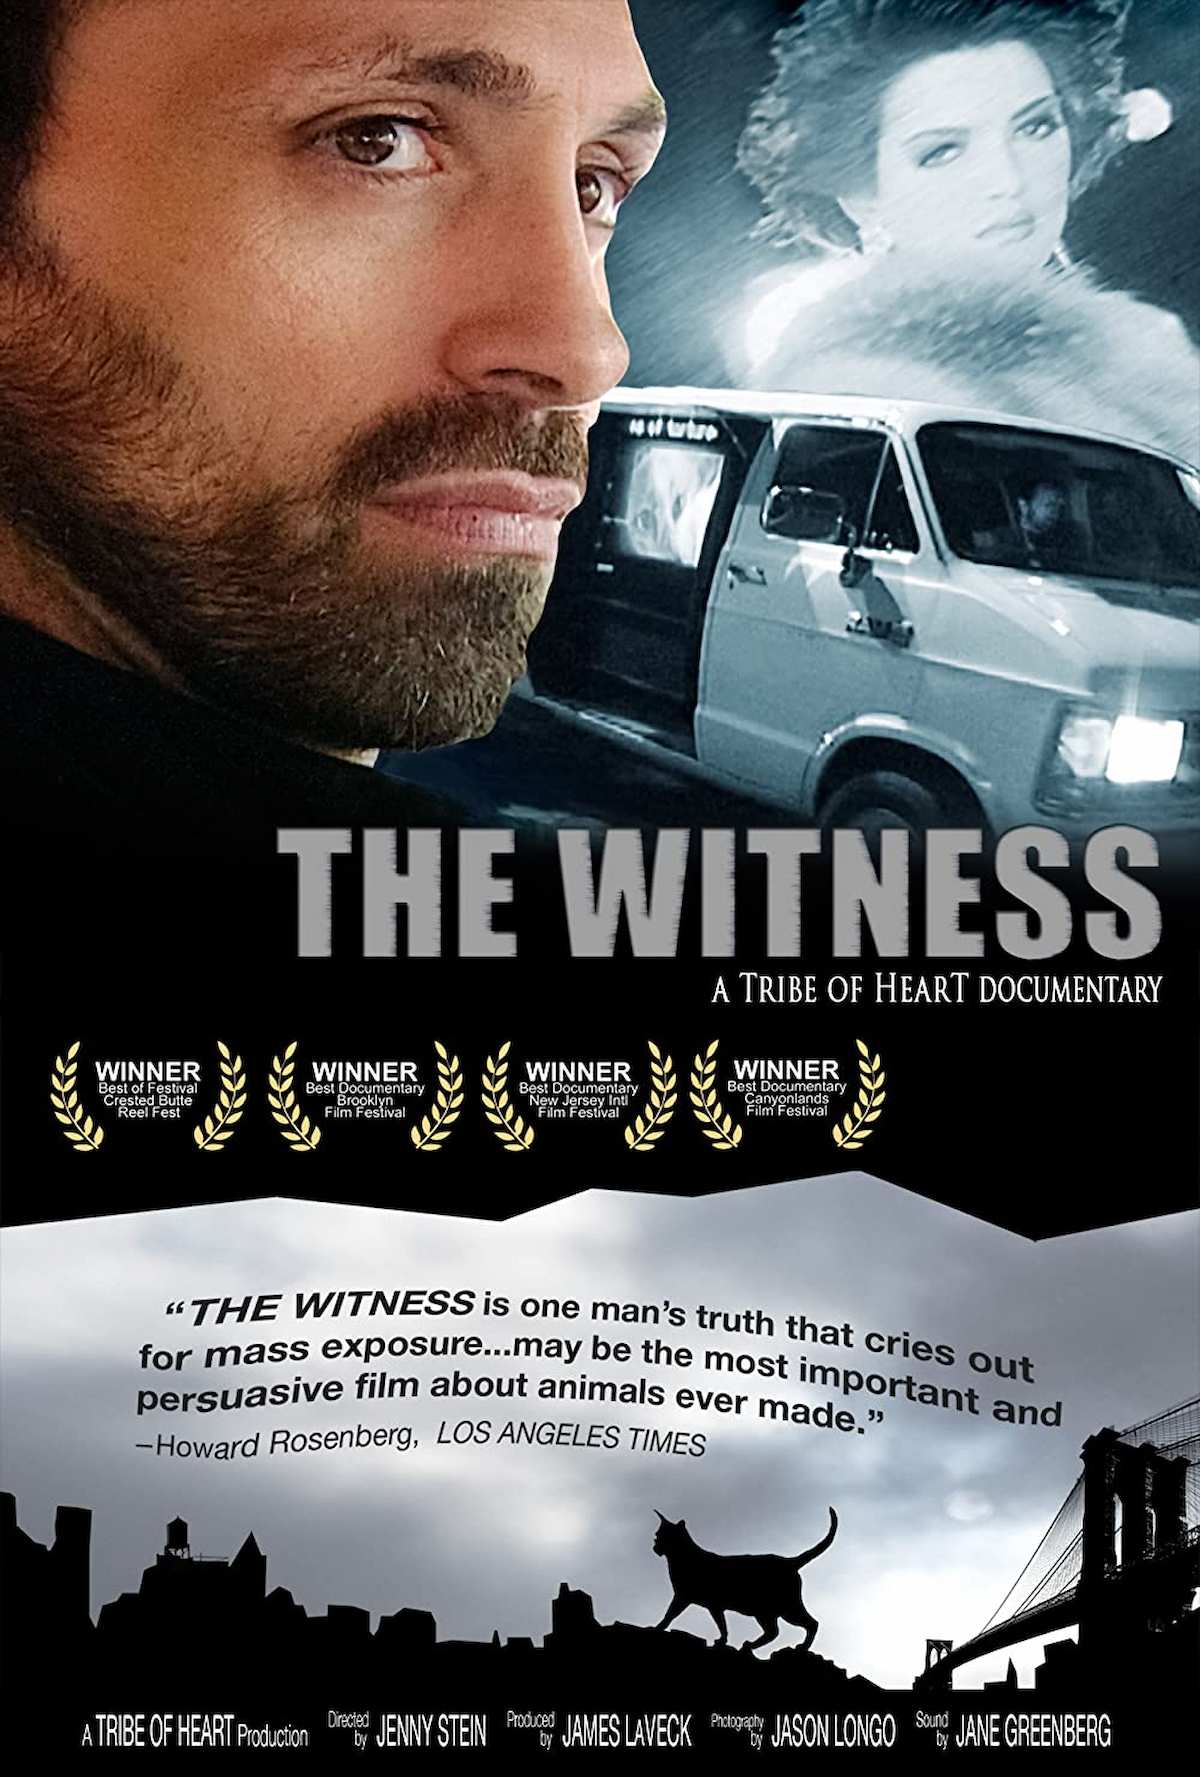 Poster for The Witness documentary.